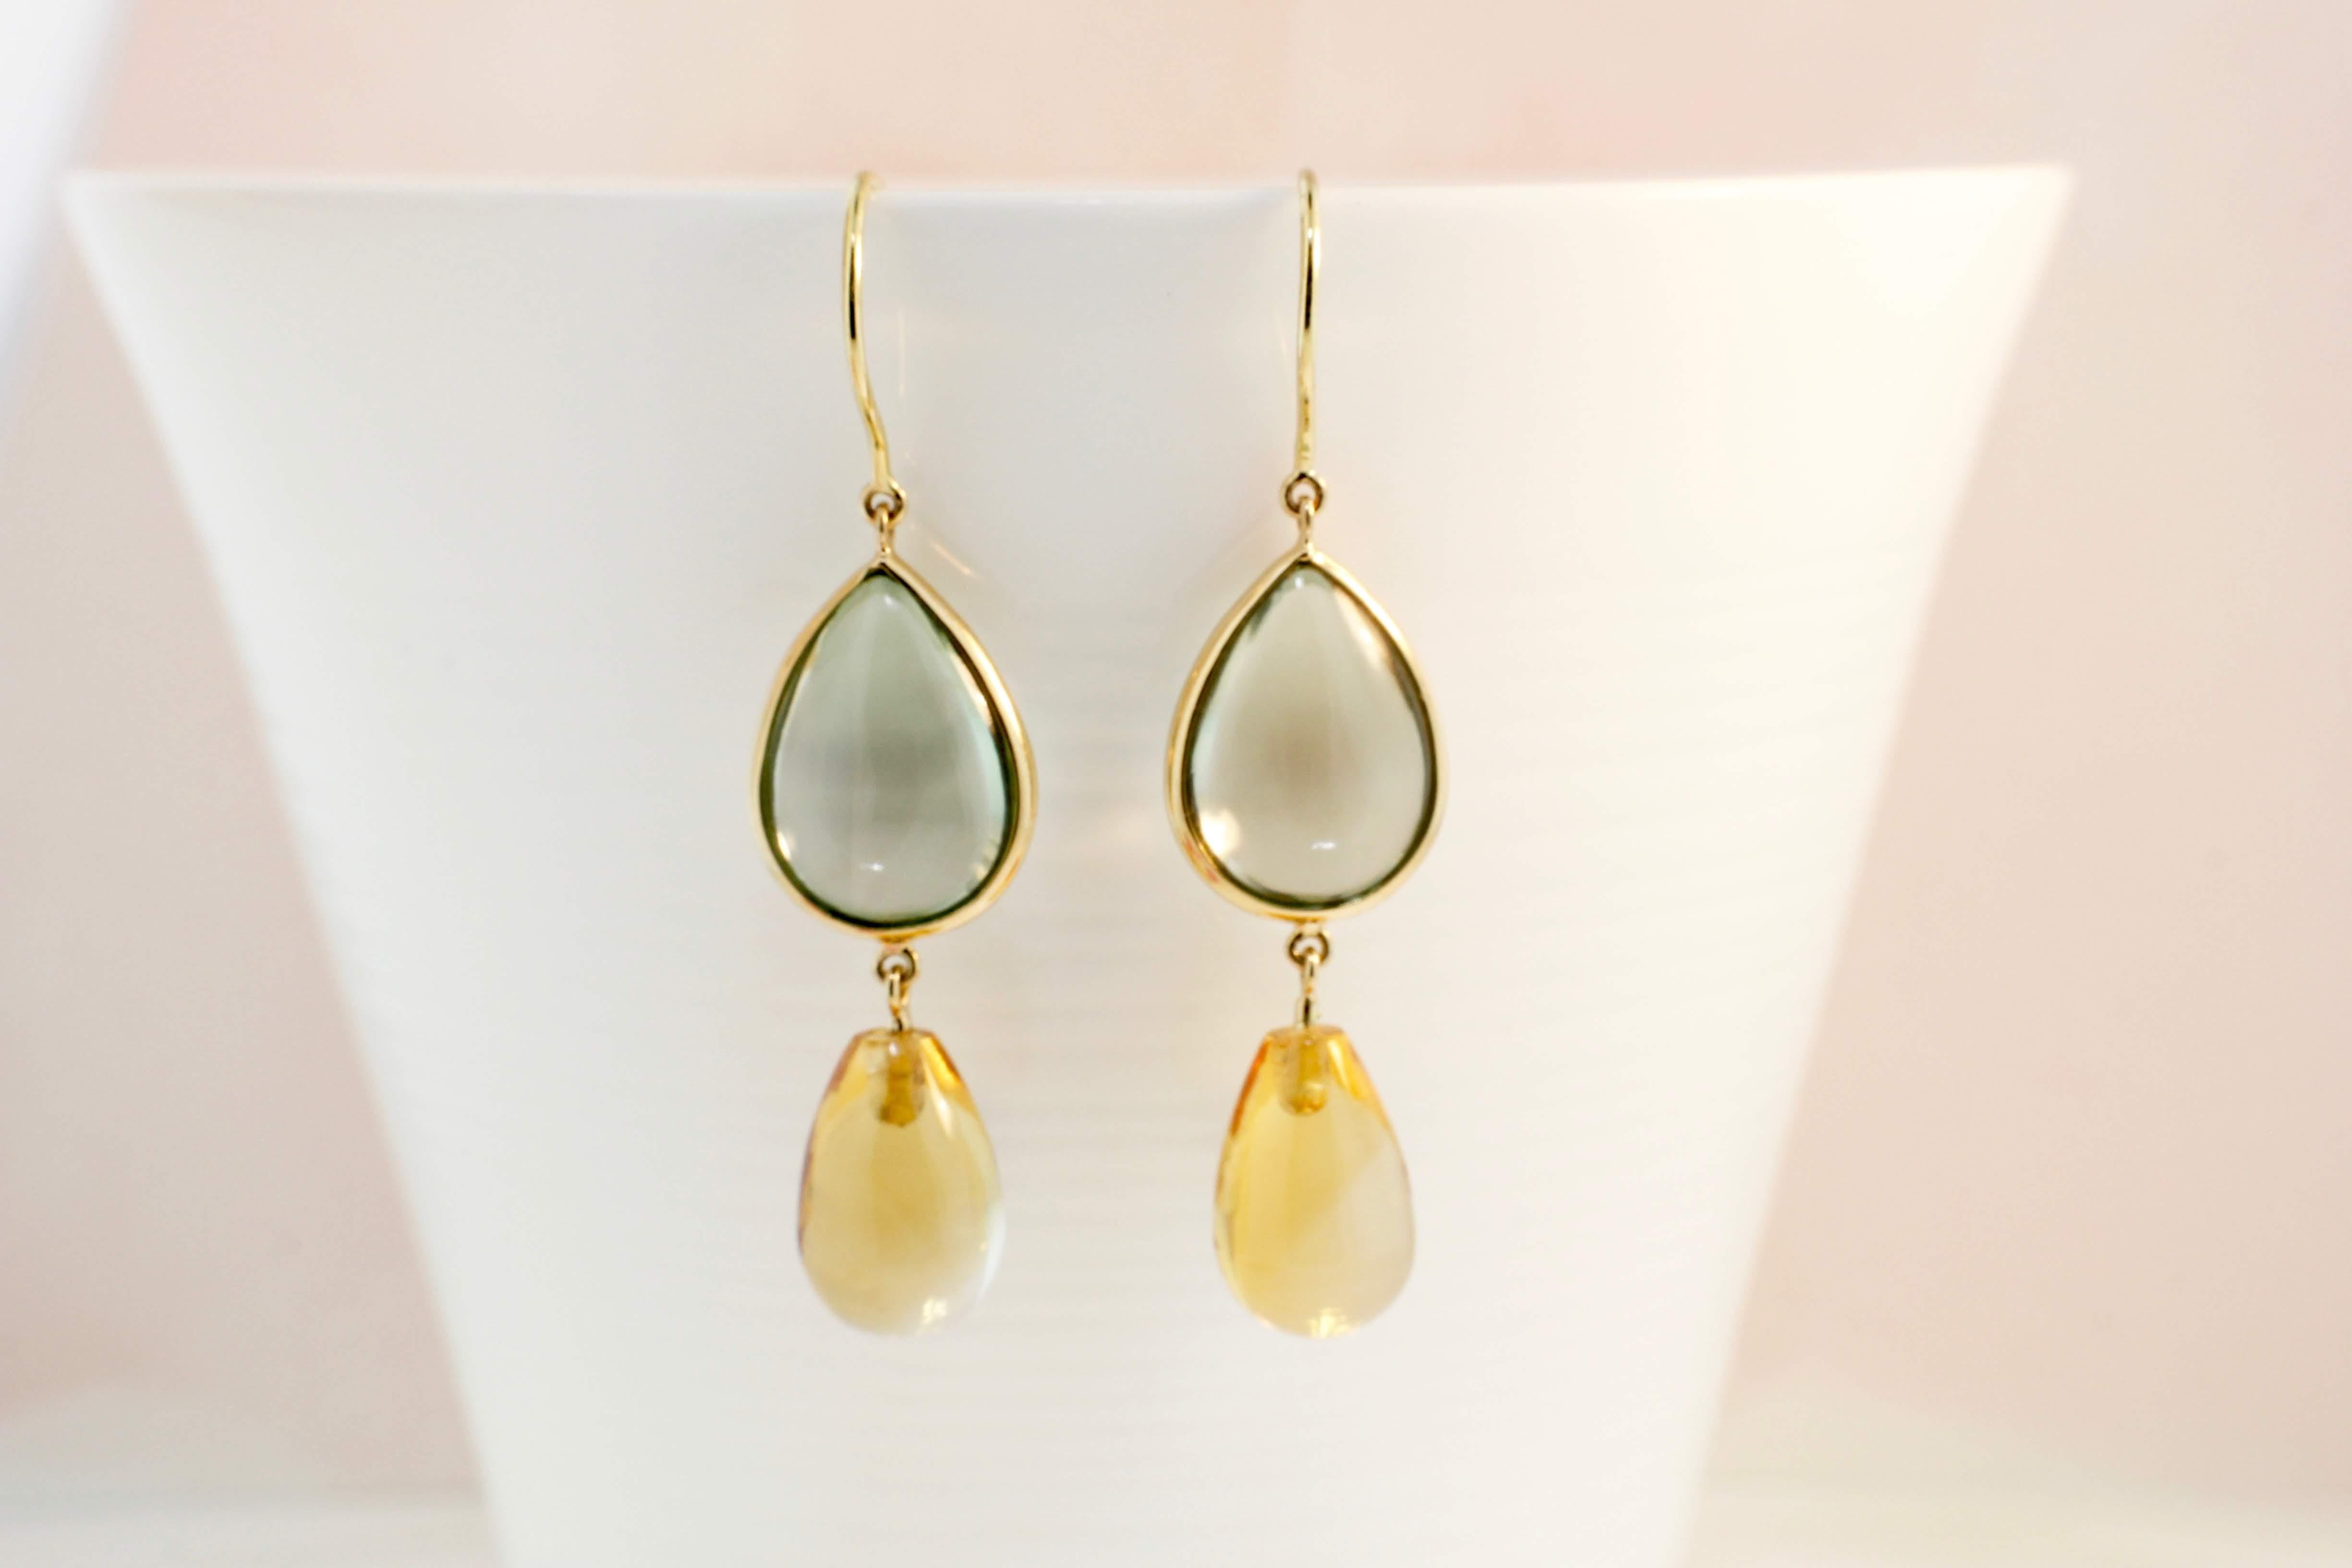 Gorgeous pastel colors of this pair are just perfect to sweet up your style. At the highest point of each earring, you'll find a bezel-set cabochon cut blue topaz, delicately holding a smooth briolette drop of citrine. The gems have been expertly